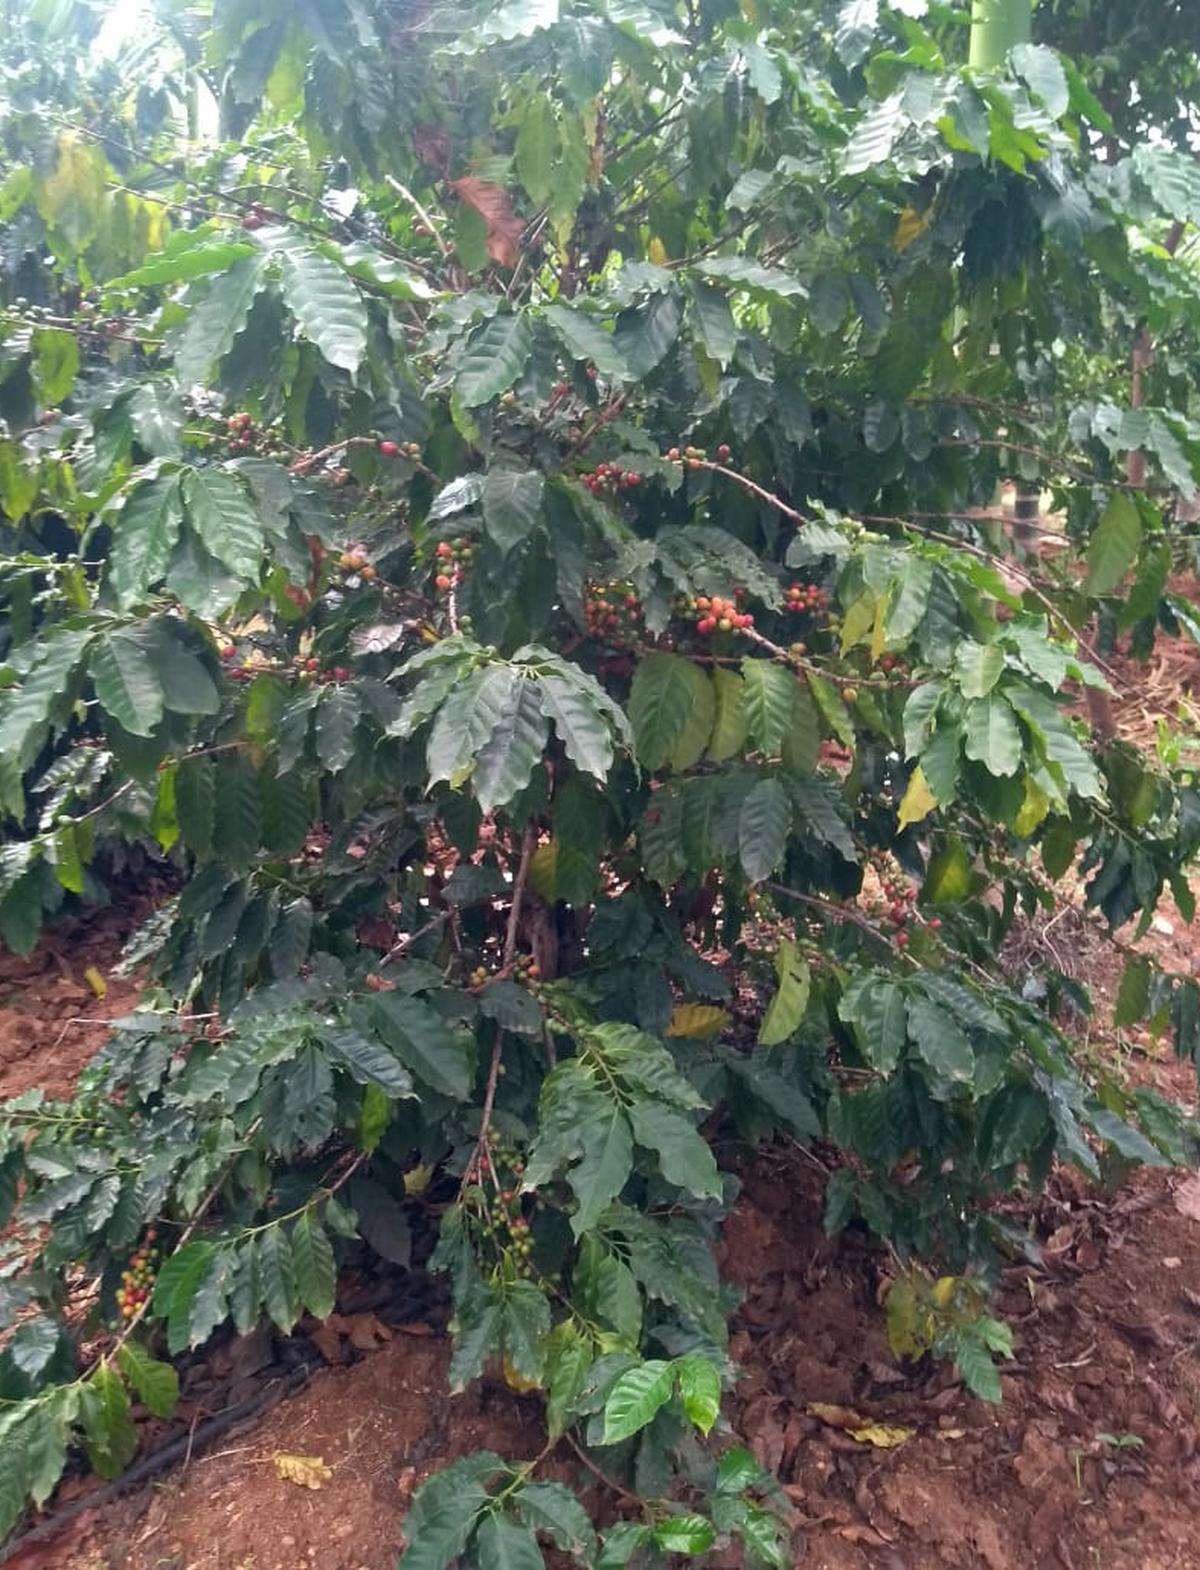 Something new brewing in Huvina Hadagali: Farmer grows coffee; Coffee Board starts quality tests